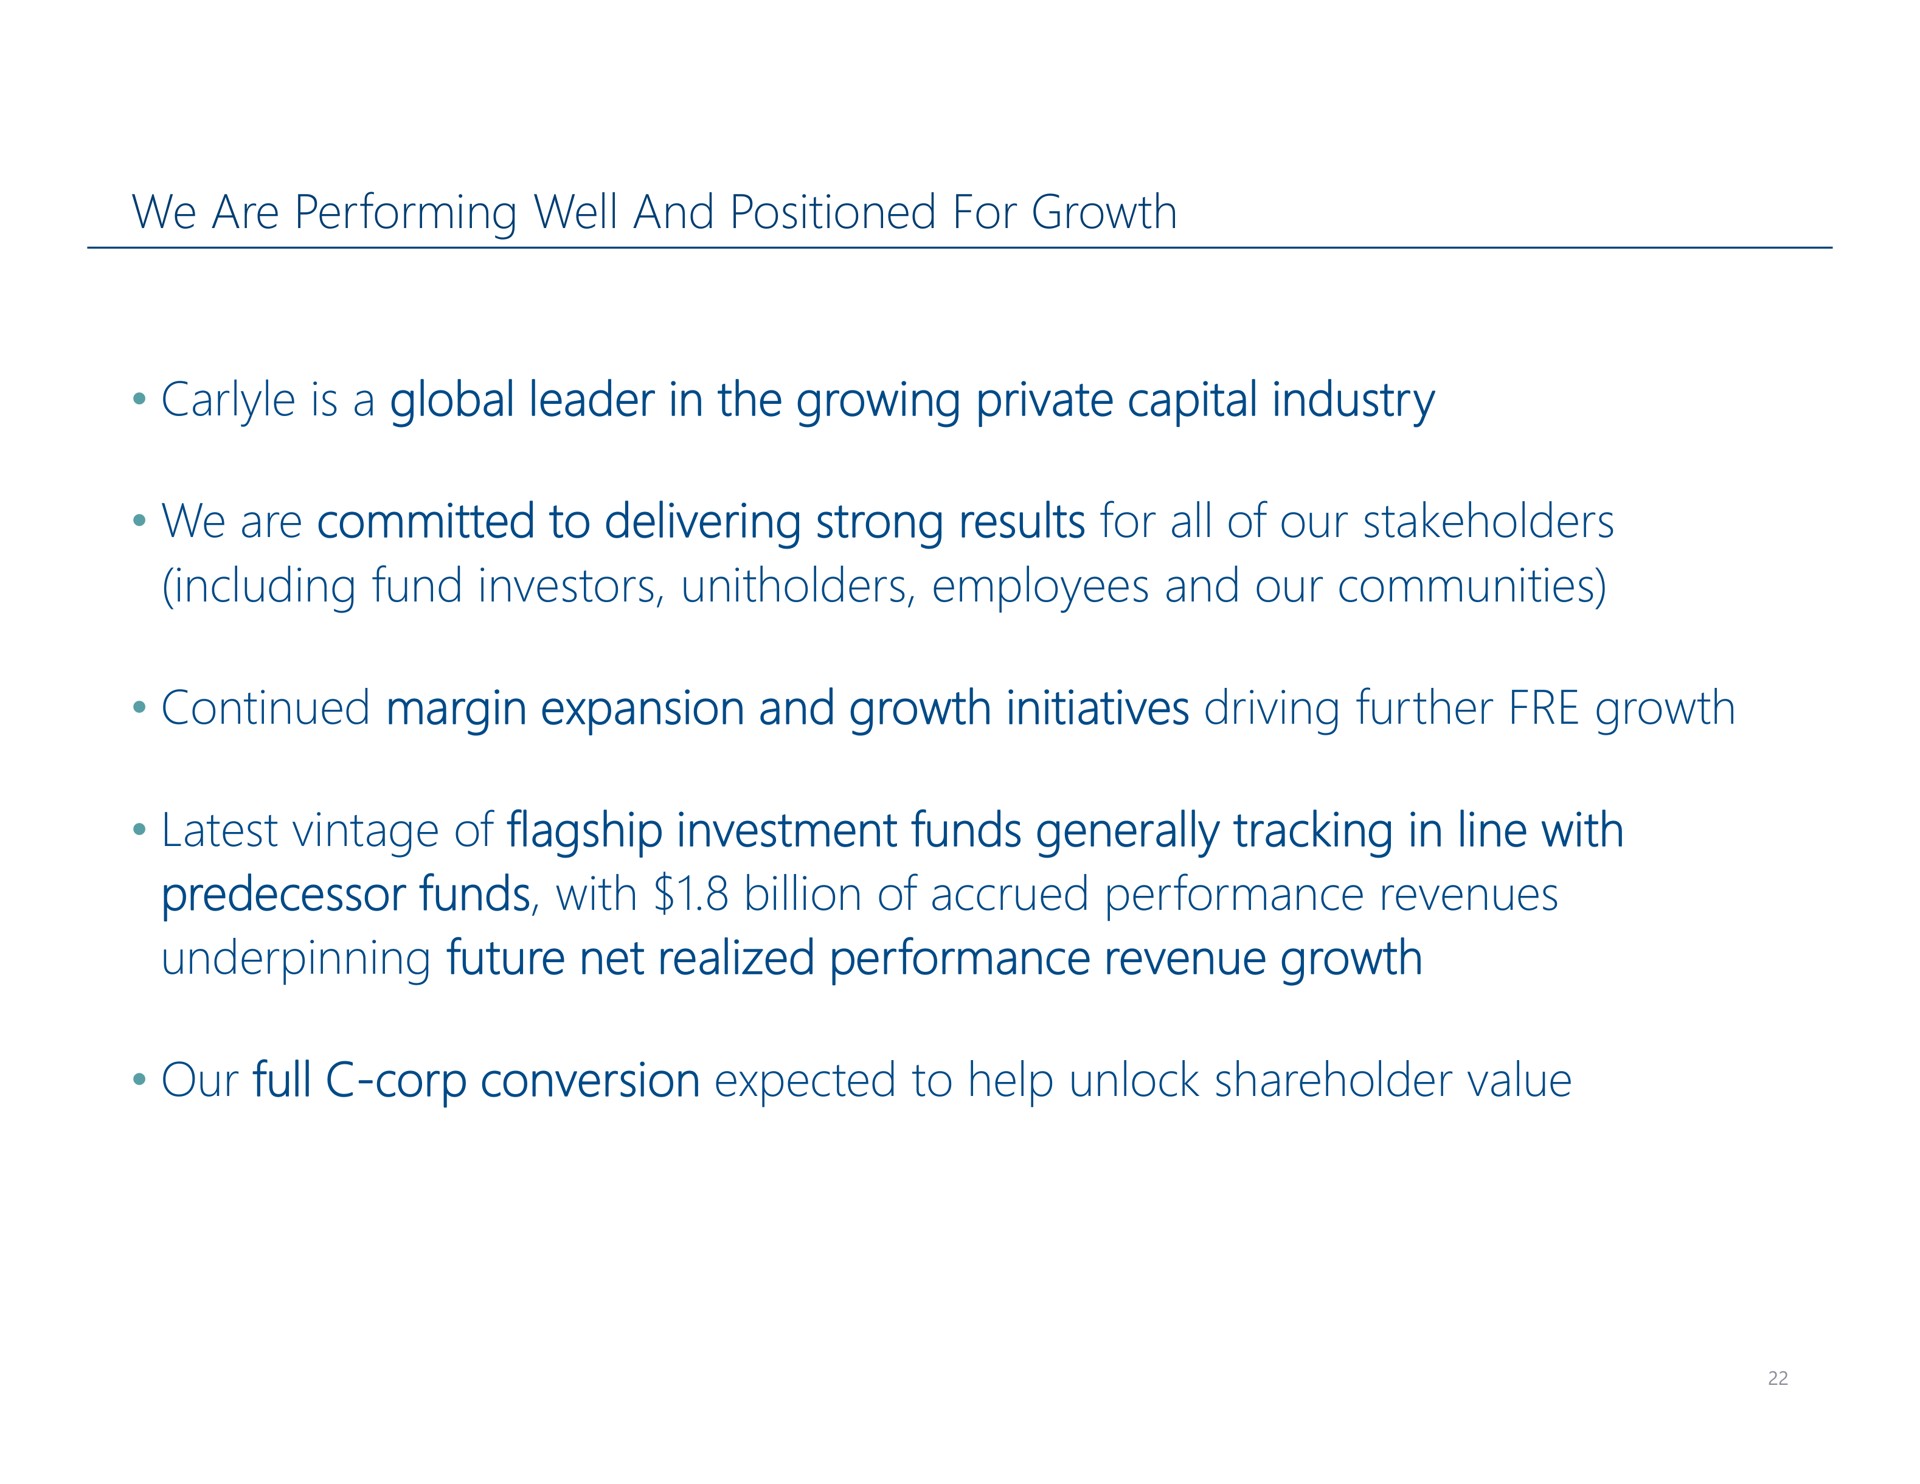 we are performing well and positioned for growth is a global leader in the growing private capital industry we are committed to delivering strong results for all of our stakeholders including fund investors employees and our communities continued margin expansion and growth initiatives driving further growth latest vintage of flagship investment funds generally tracking in line with predecessor funds with billion of accrued performance revenues underpinning future net realized performance revenue growth our full corp conversion expected to help unlock shareholder value | Carlyle